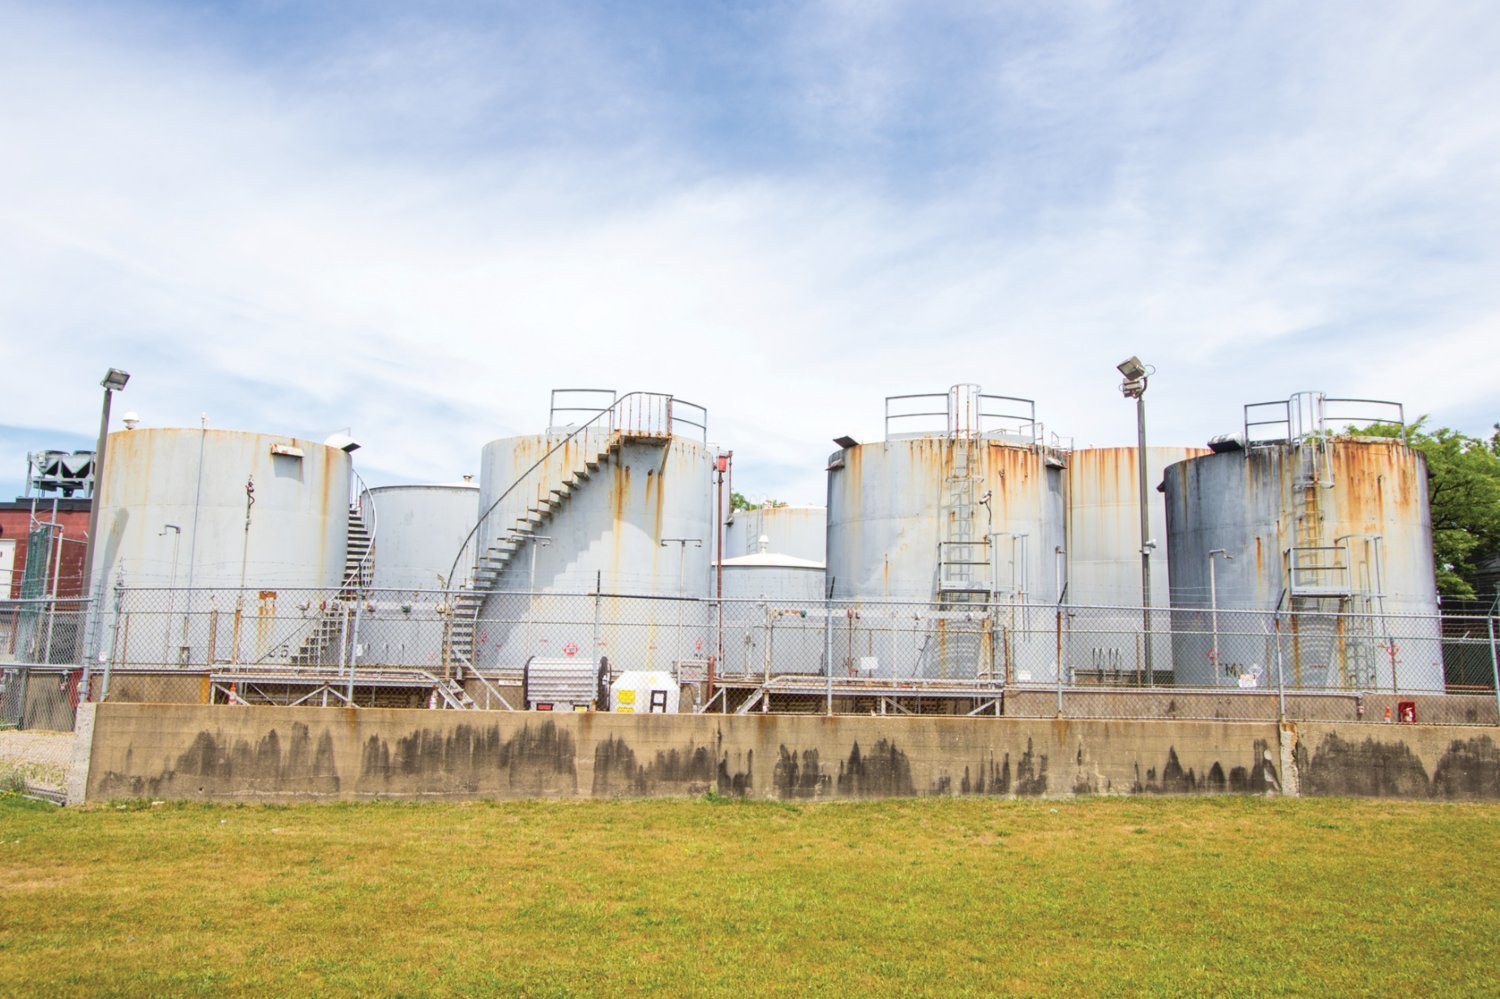 Nantucket's downtown fuel-tank farm is set to be dismantled starting Monday.